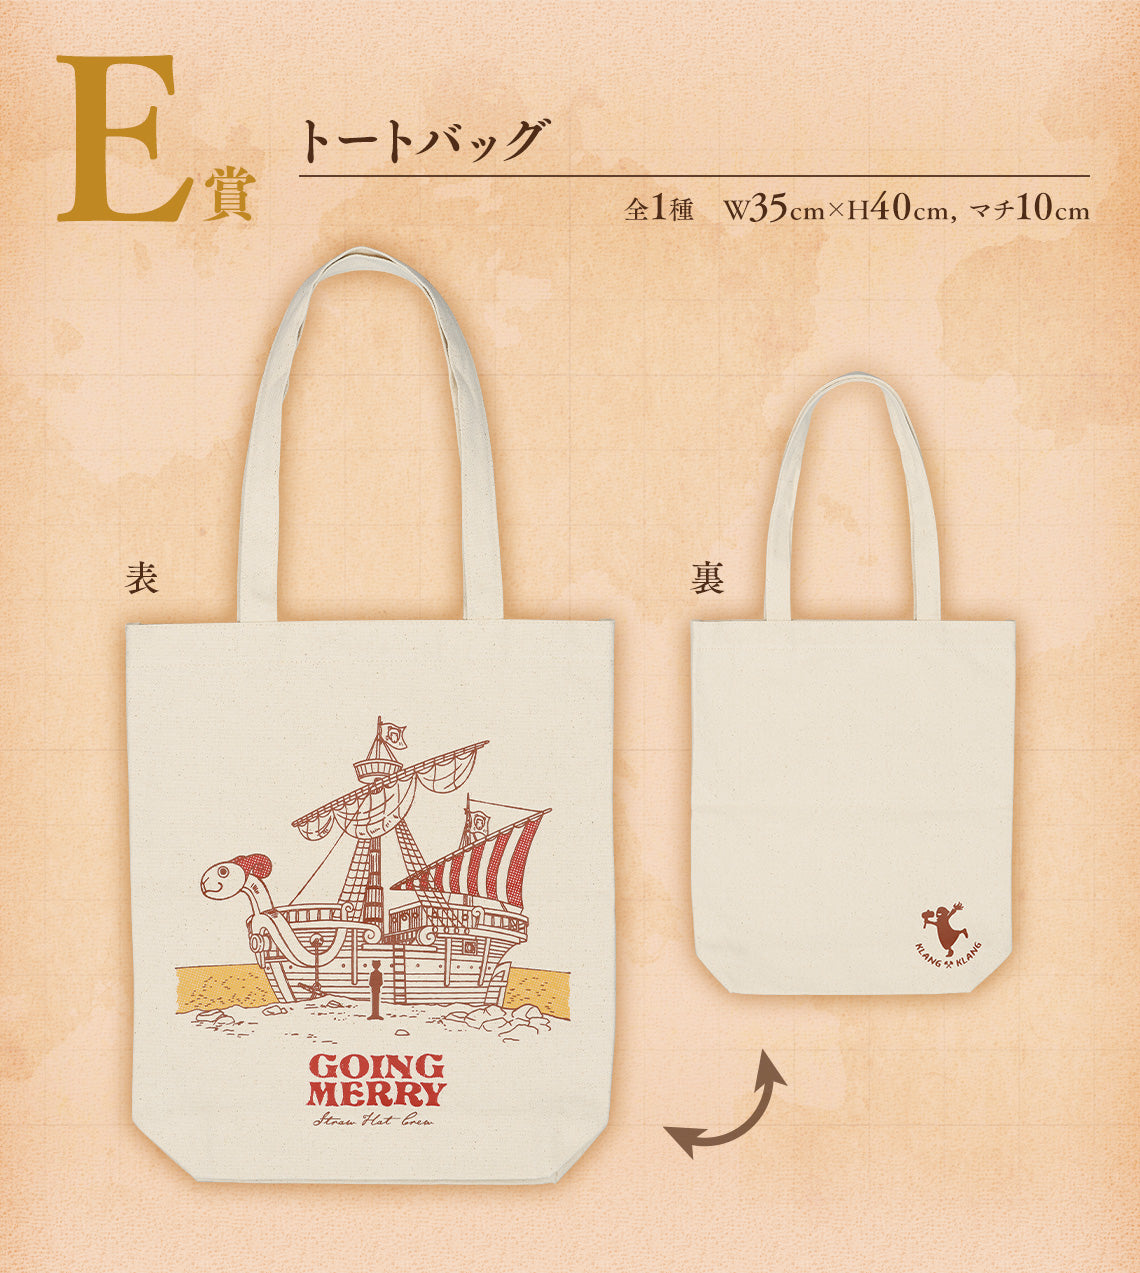 ONE PIECE ICHIBAN KUJI EMOTIONAL STORIES 2 PRIZE E REVIBLE MOMENT - TOTE BAG